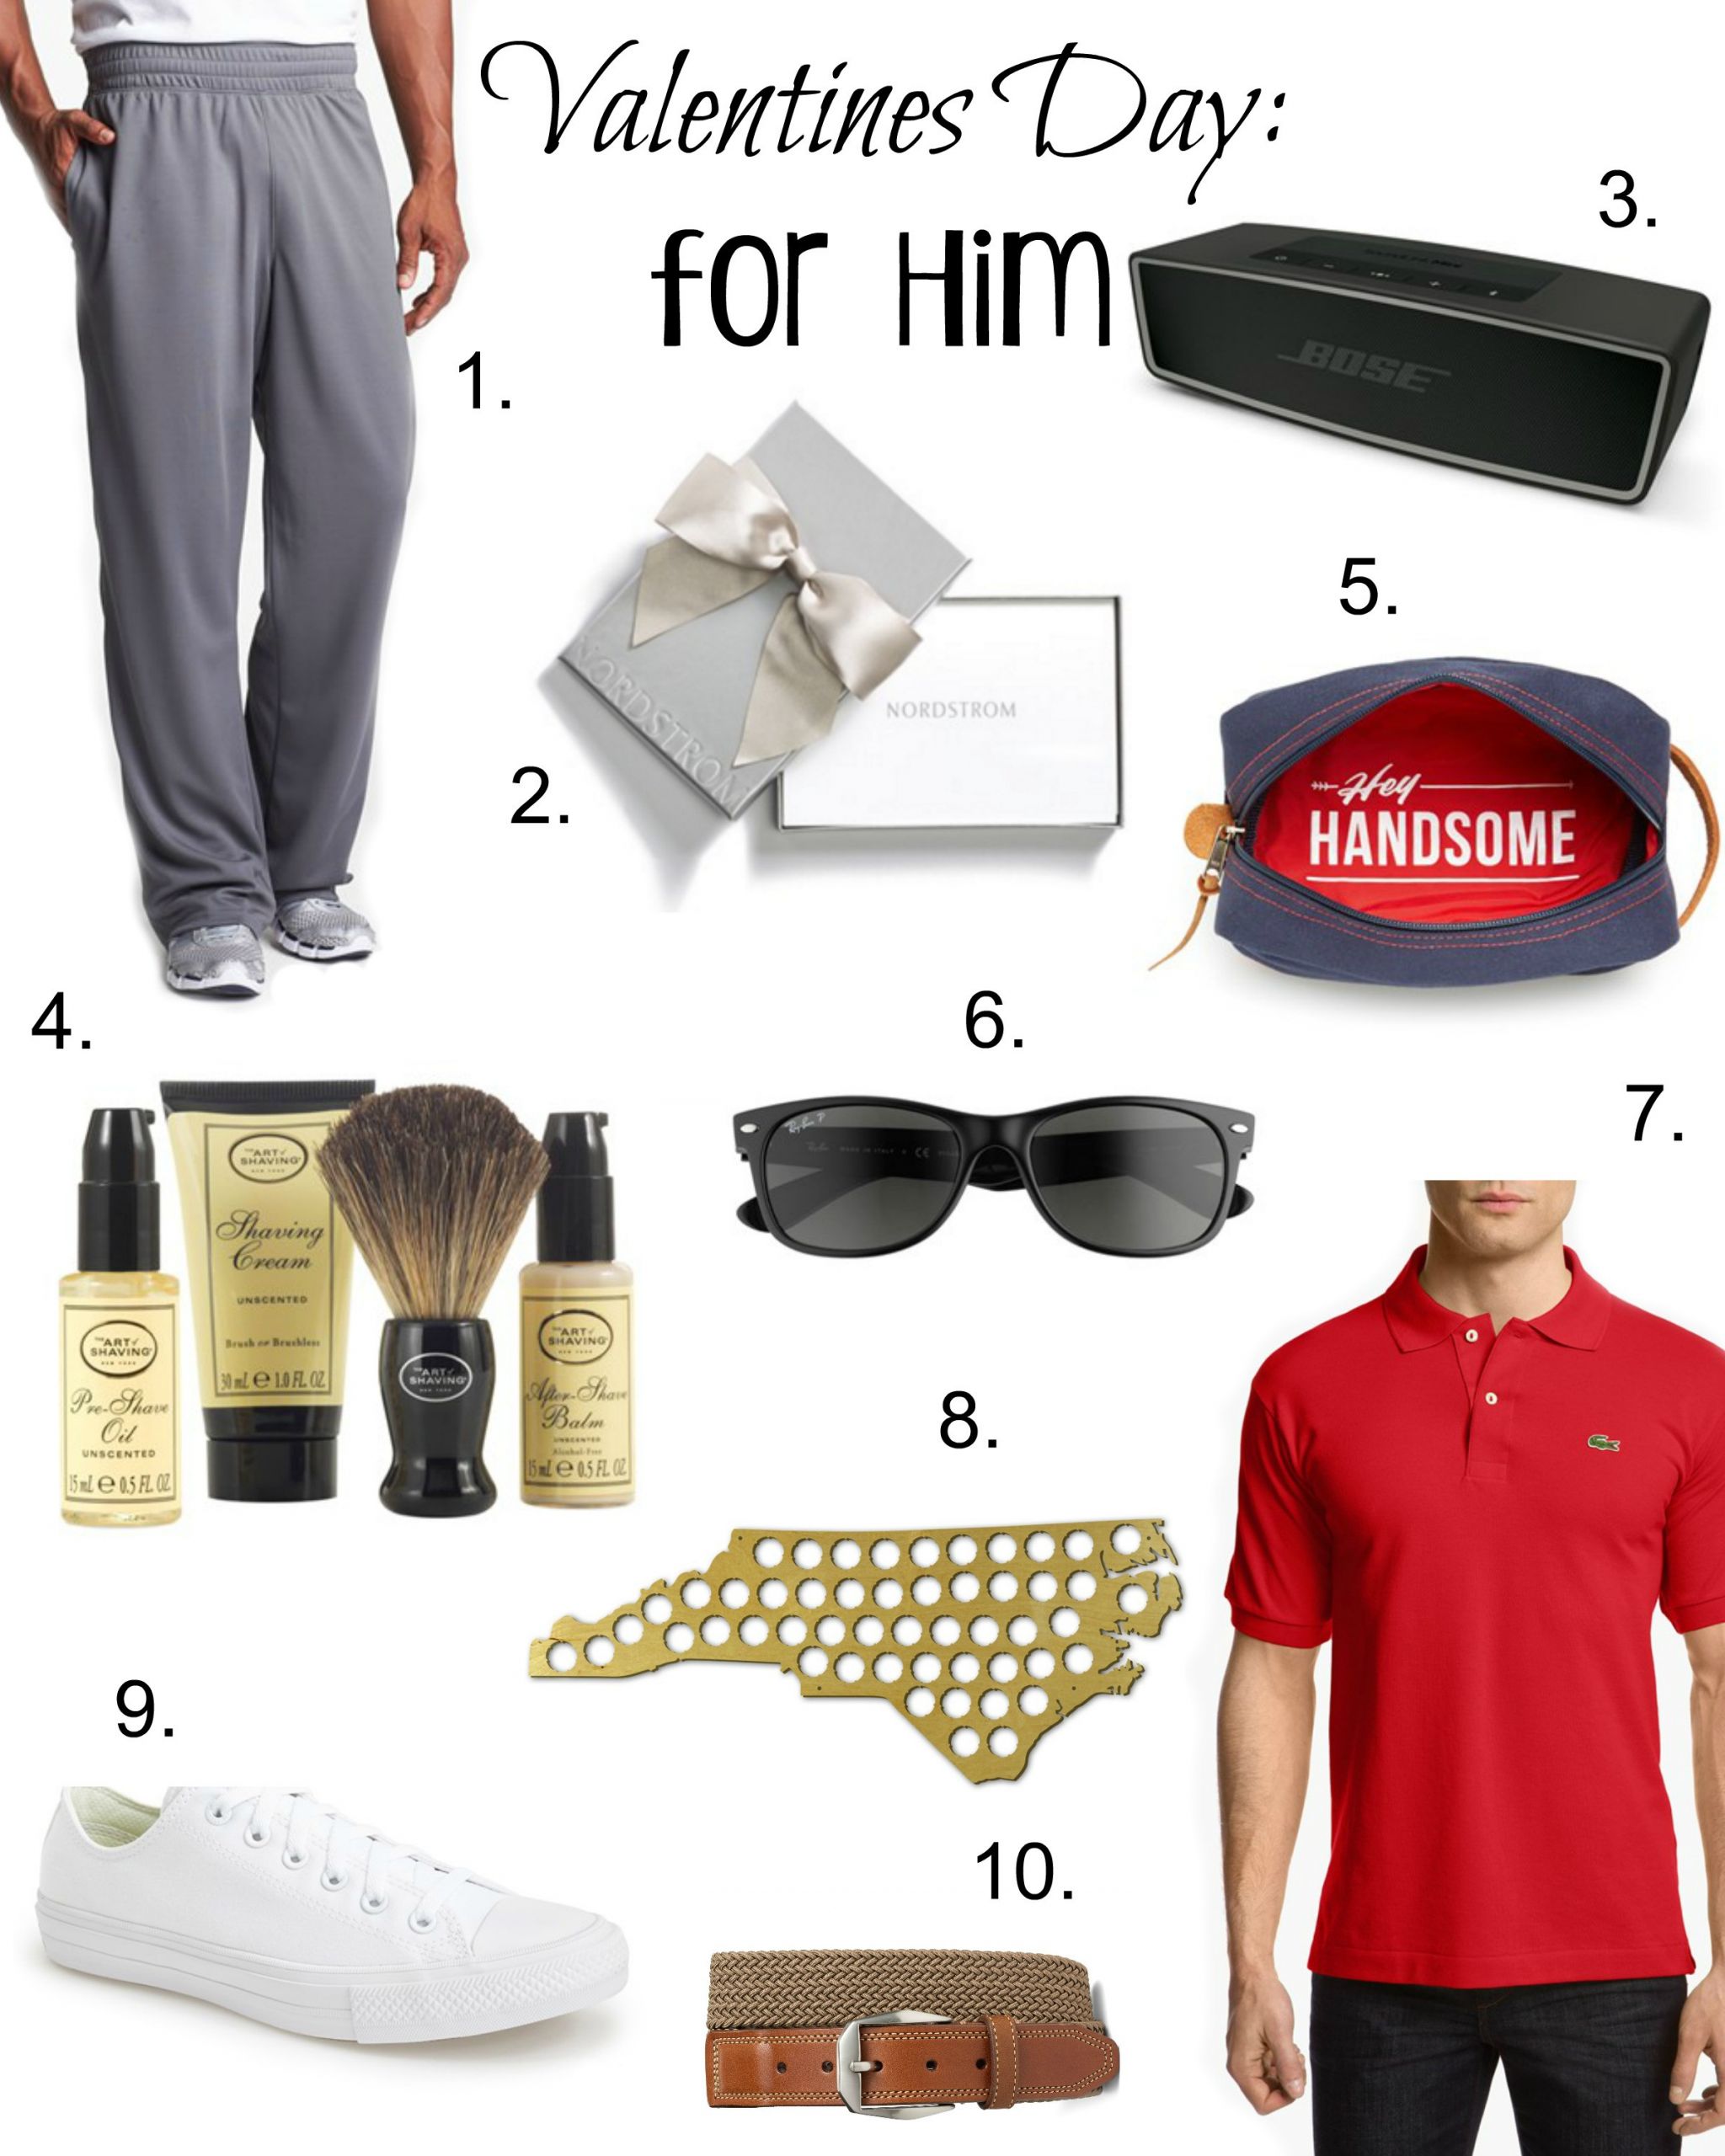 Gifts For Valentines Day For Him
 Top 10 Valentines Day Gifts For Him